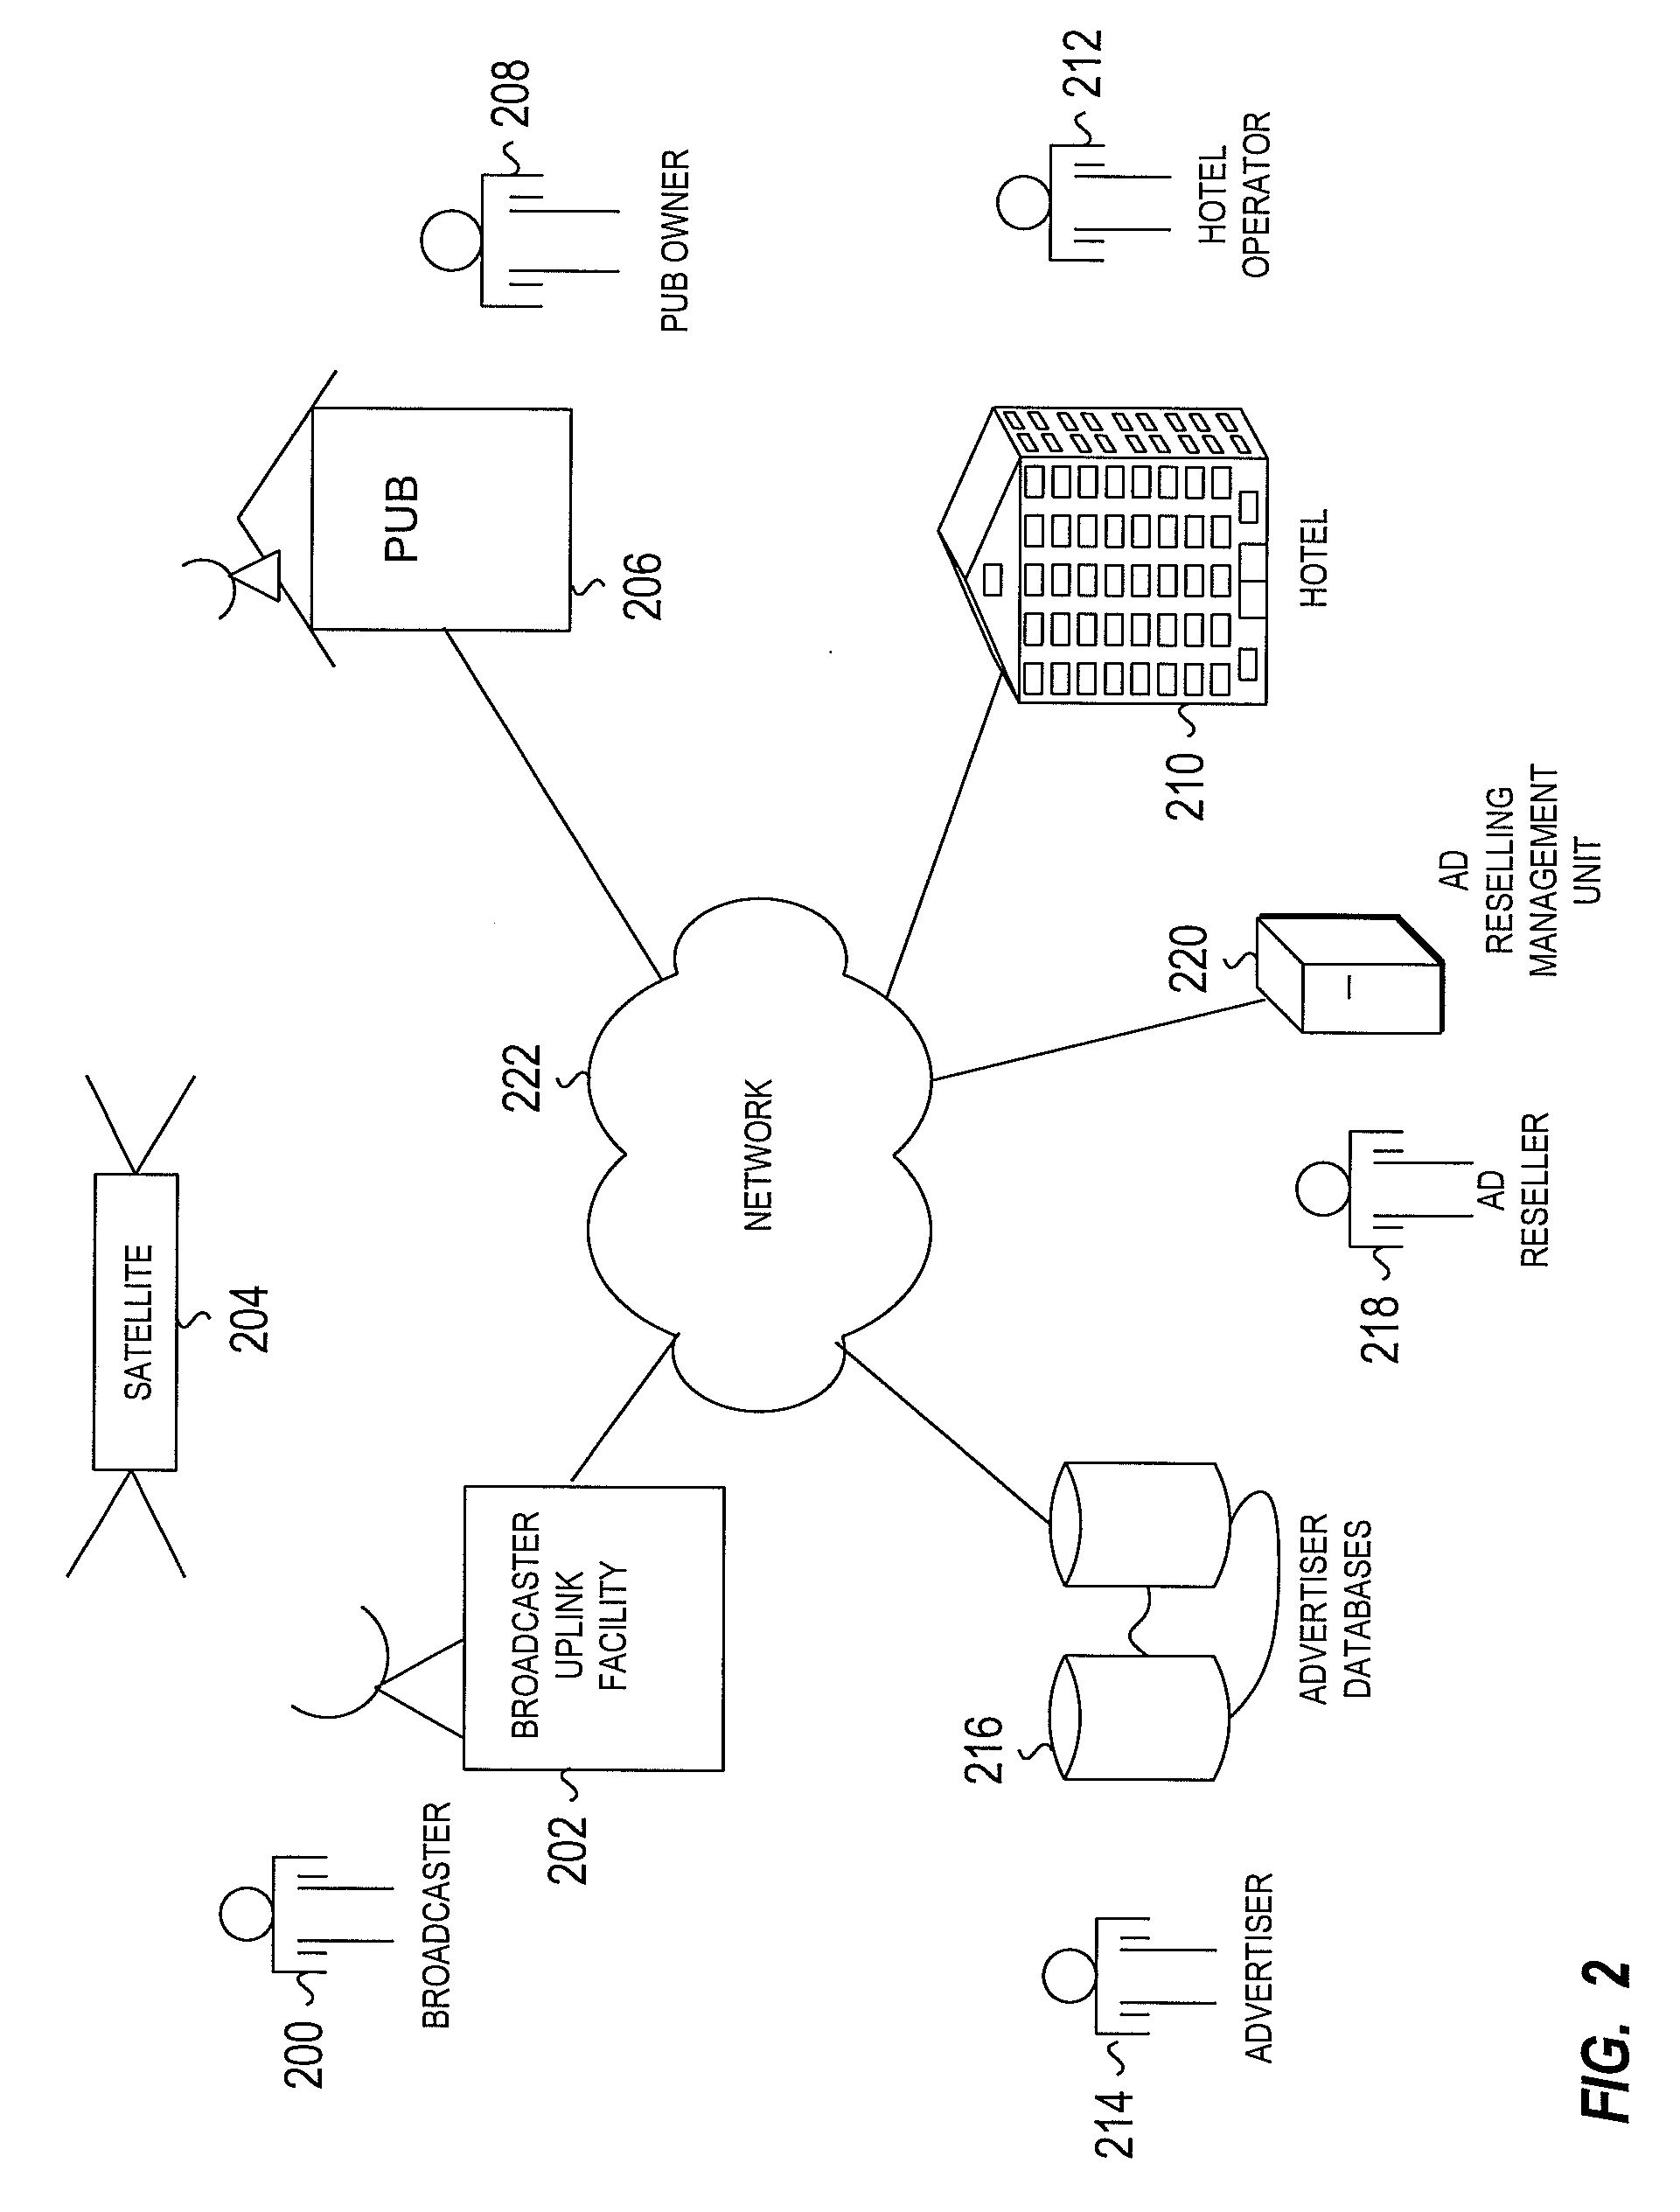 Method and System for Advertisement Detection and Substitution